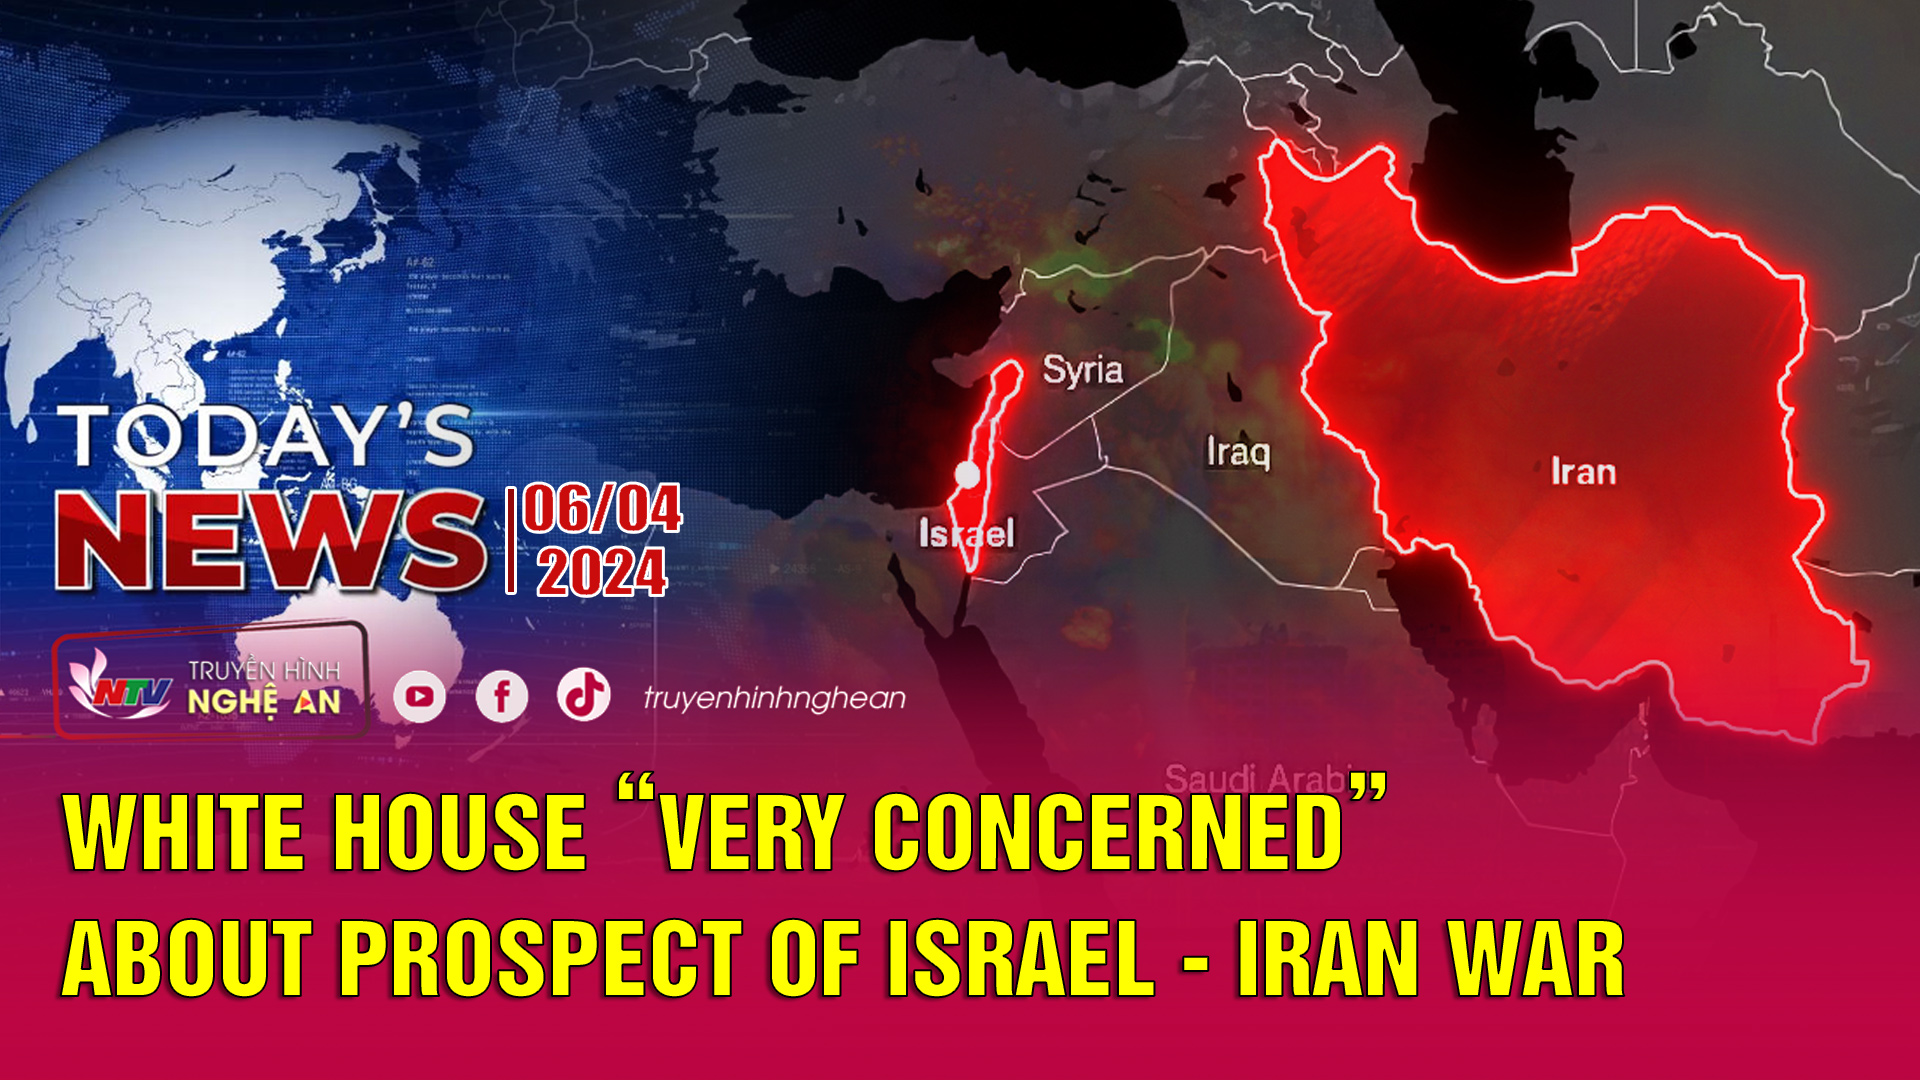 Today's News 6/4/2024: White House “very concerned” about prospect of Israel - Iran war